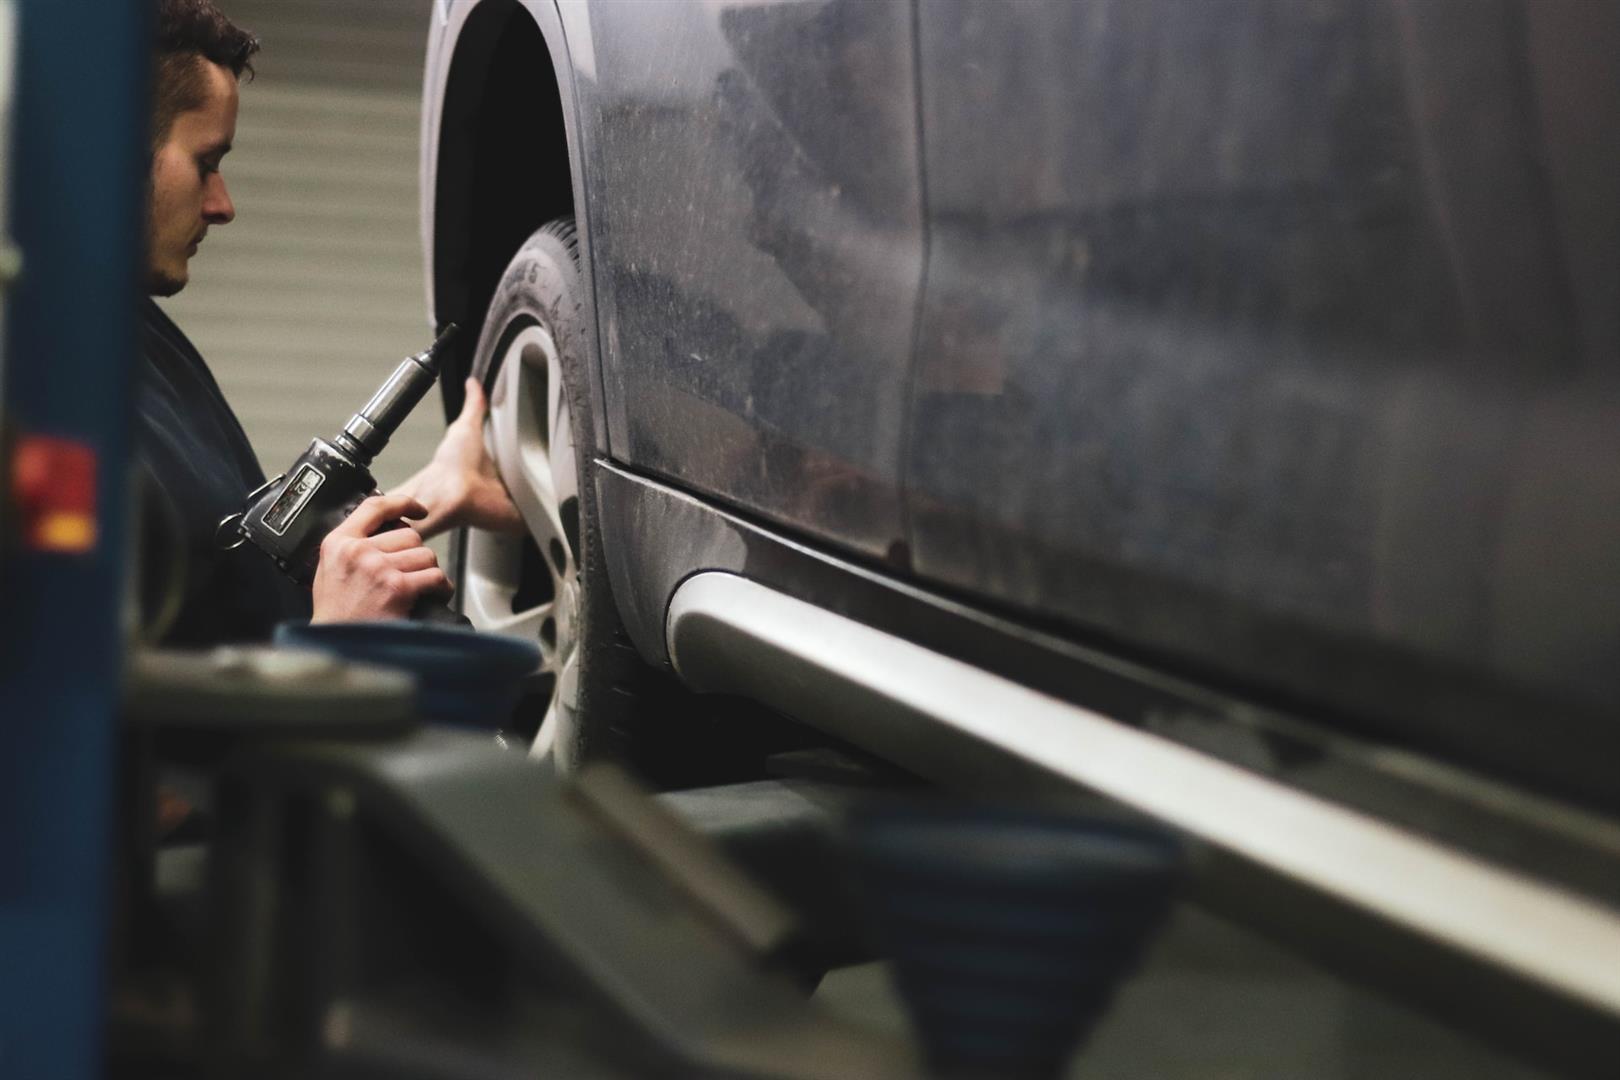 Preventative Maintenance for Your Vehicle